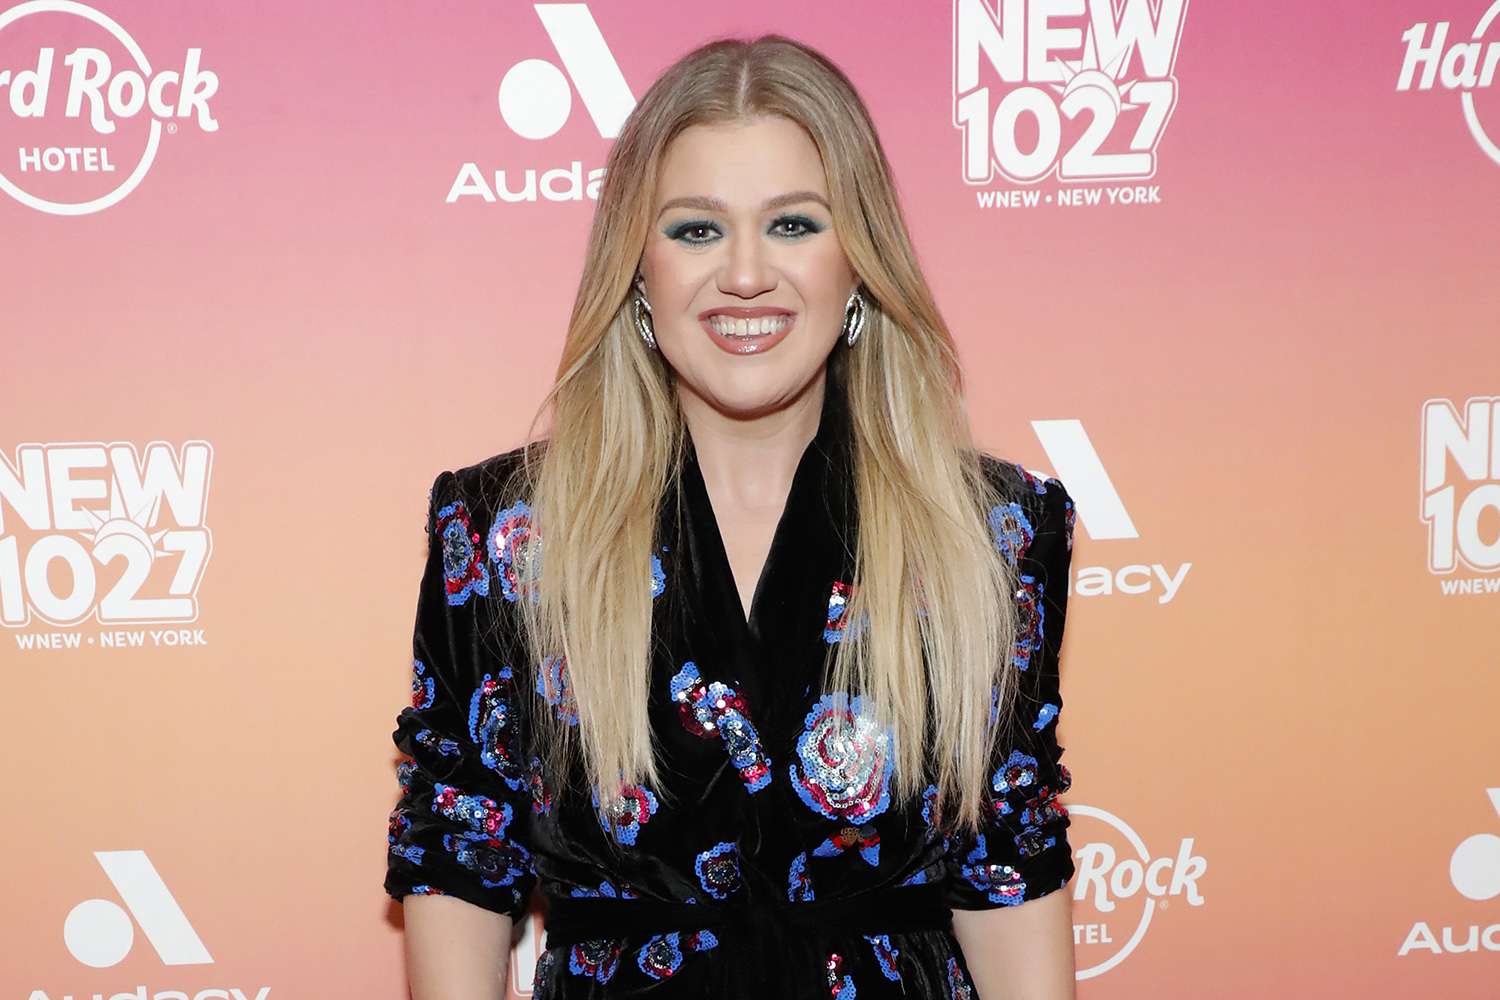 kelly-clarkson-sets-strict-social-media-rules-for-her-kids-while-they-live-with-her